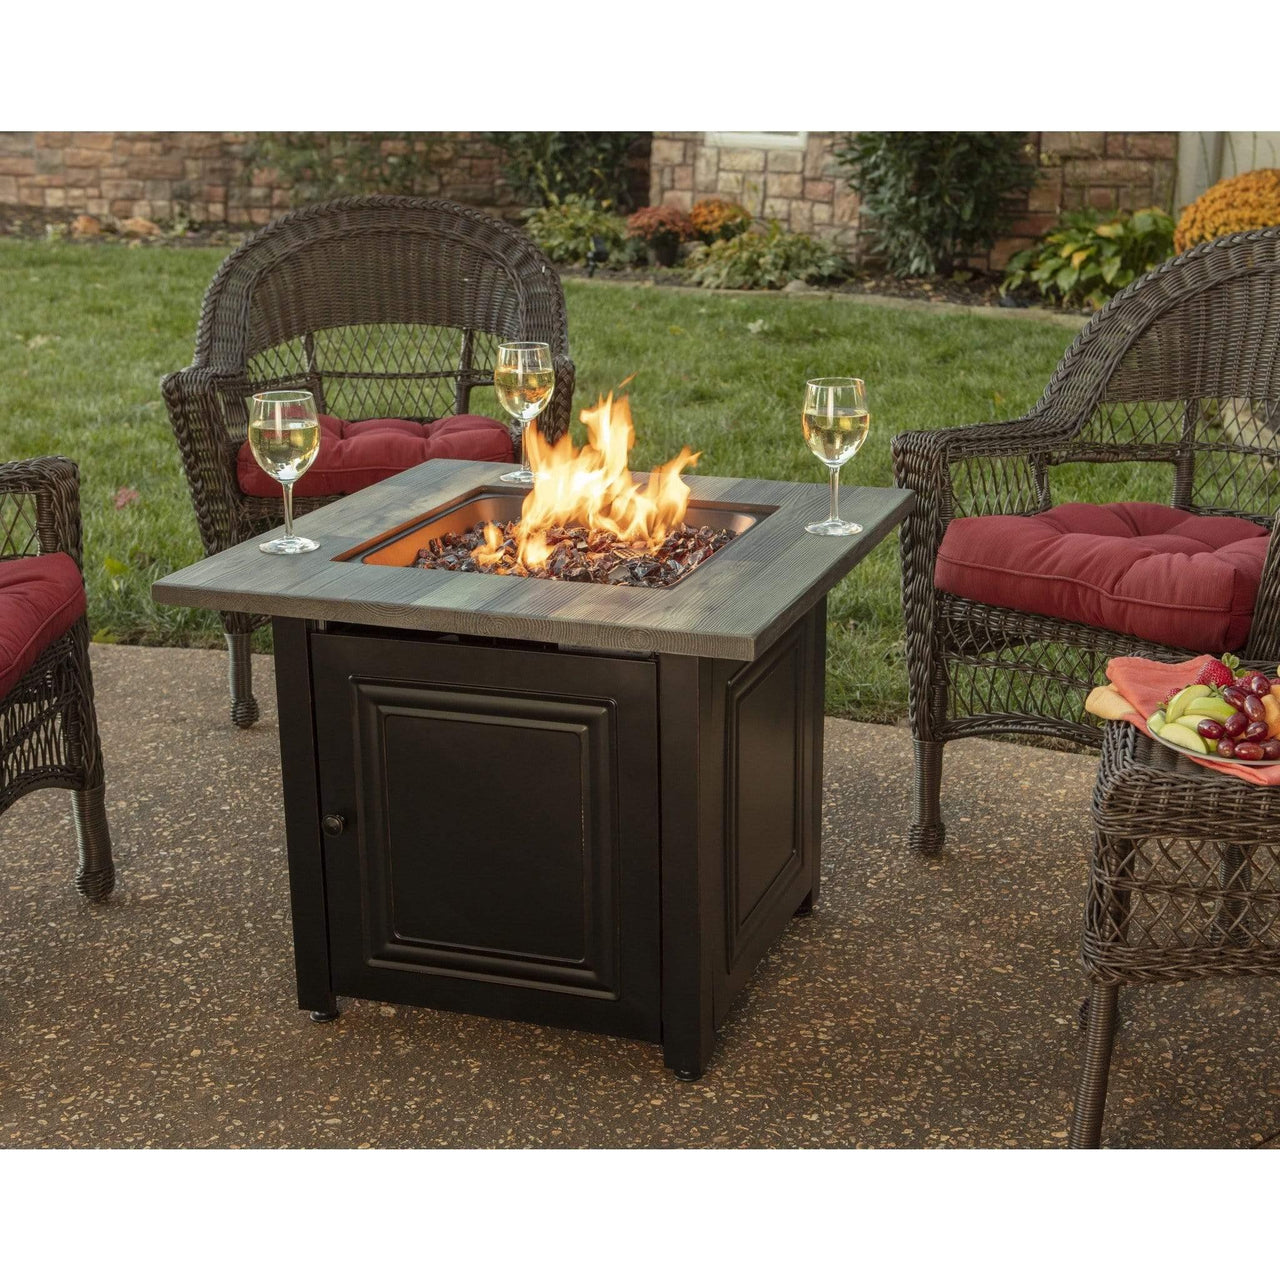 Endless Summer The Burlington, LP Gas Outdoor Fire Pit with Printed Resin Mantel - GAD15285SP - Fire Pit Stock